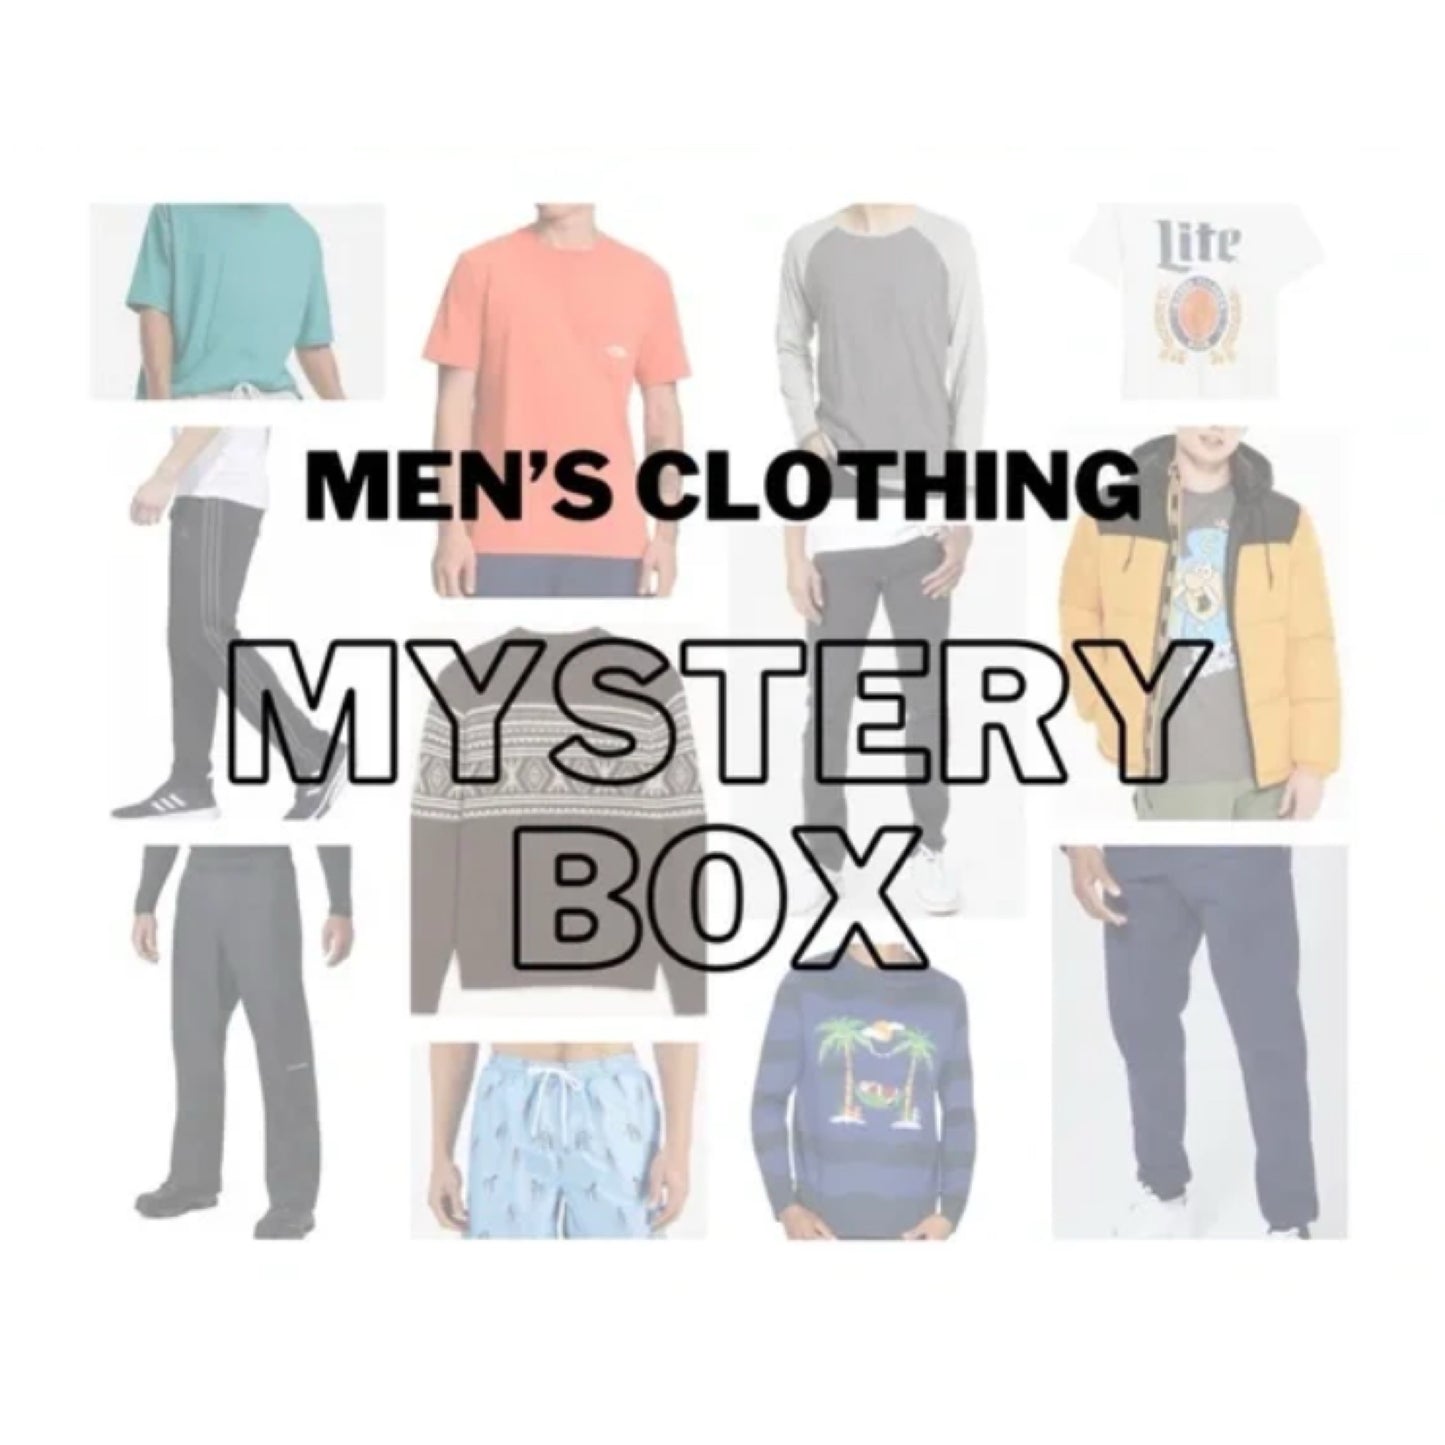 Men's Clothing Mystery Box Resellers